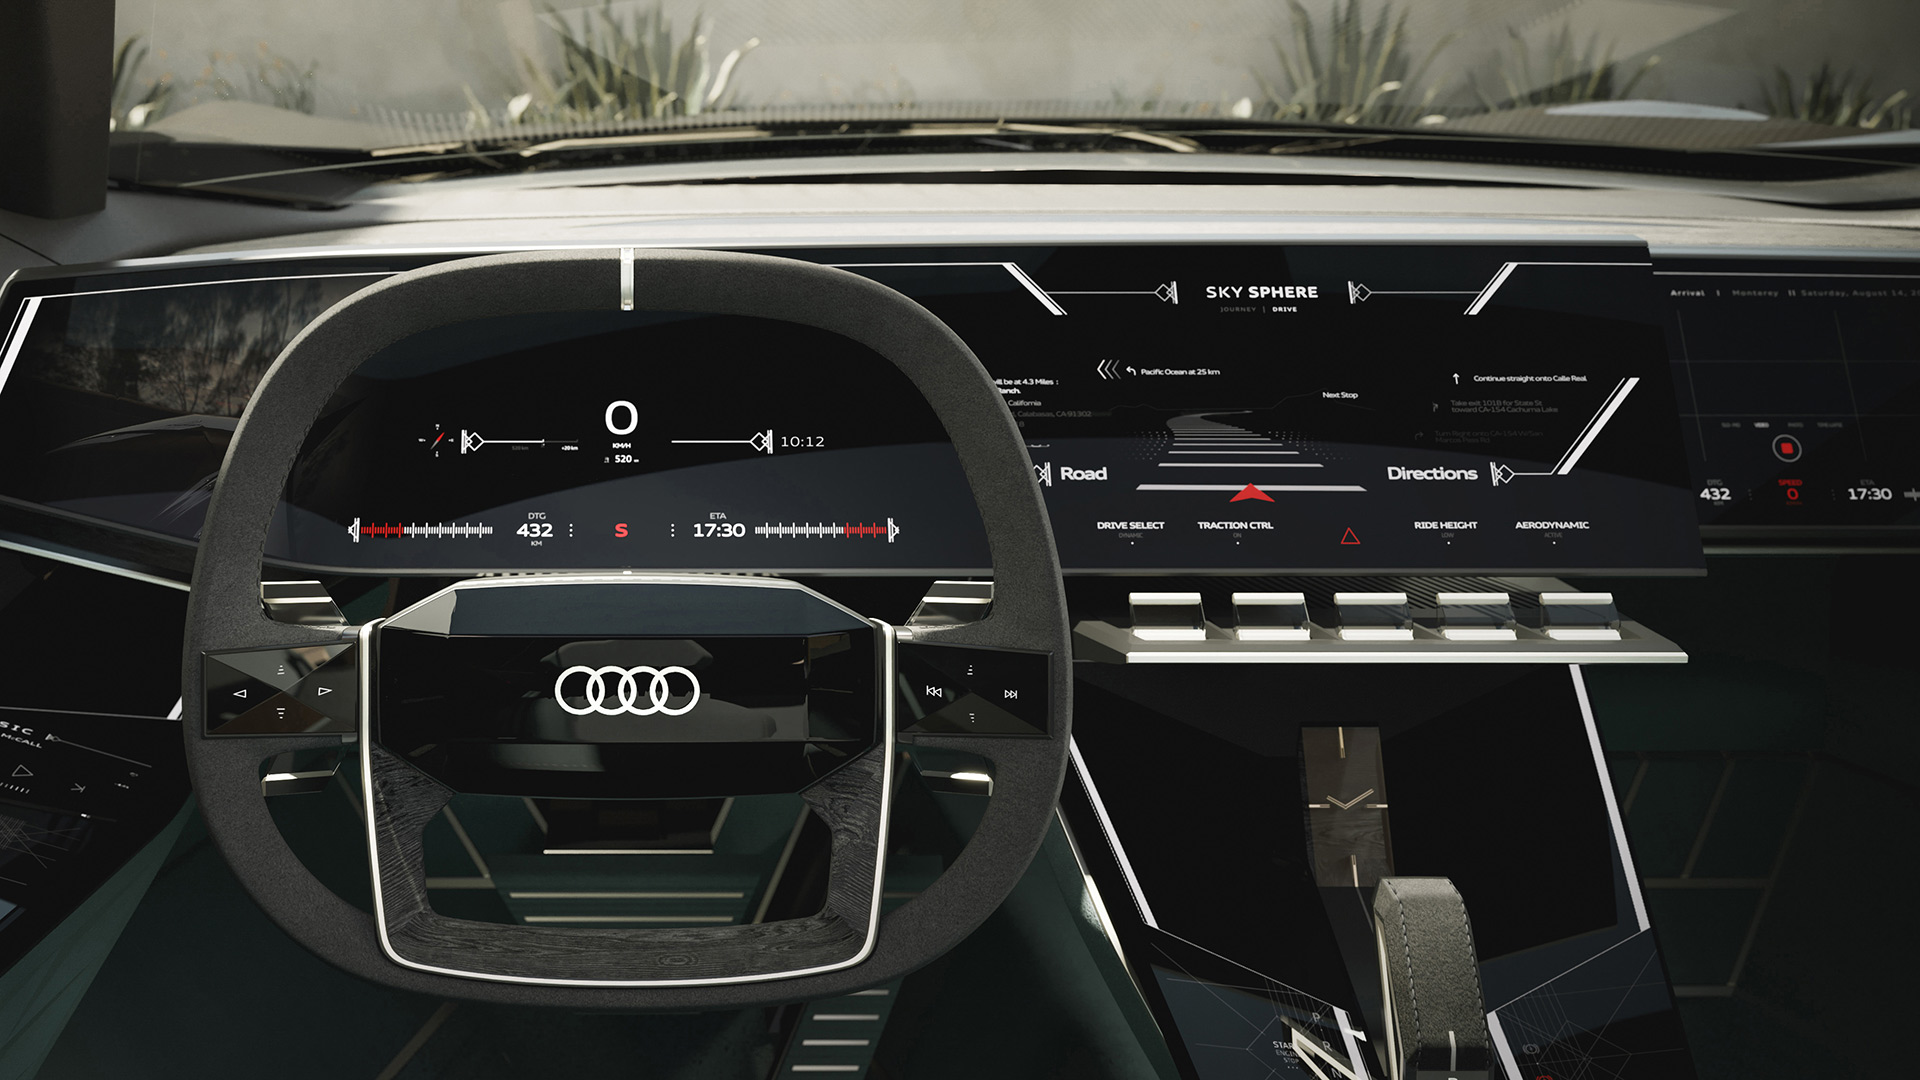 Audi wants your next car to be both a 5G mobile device and a vehicle